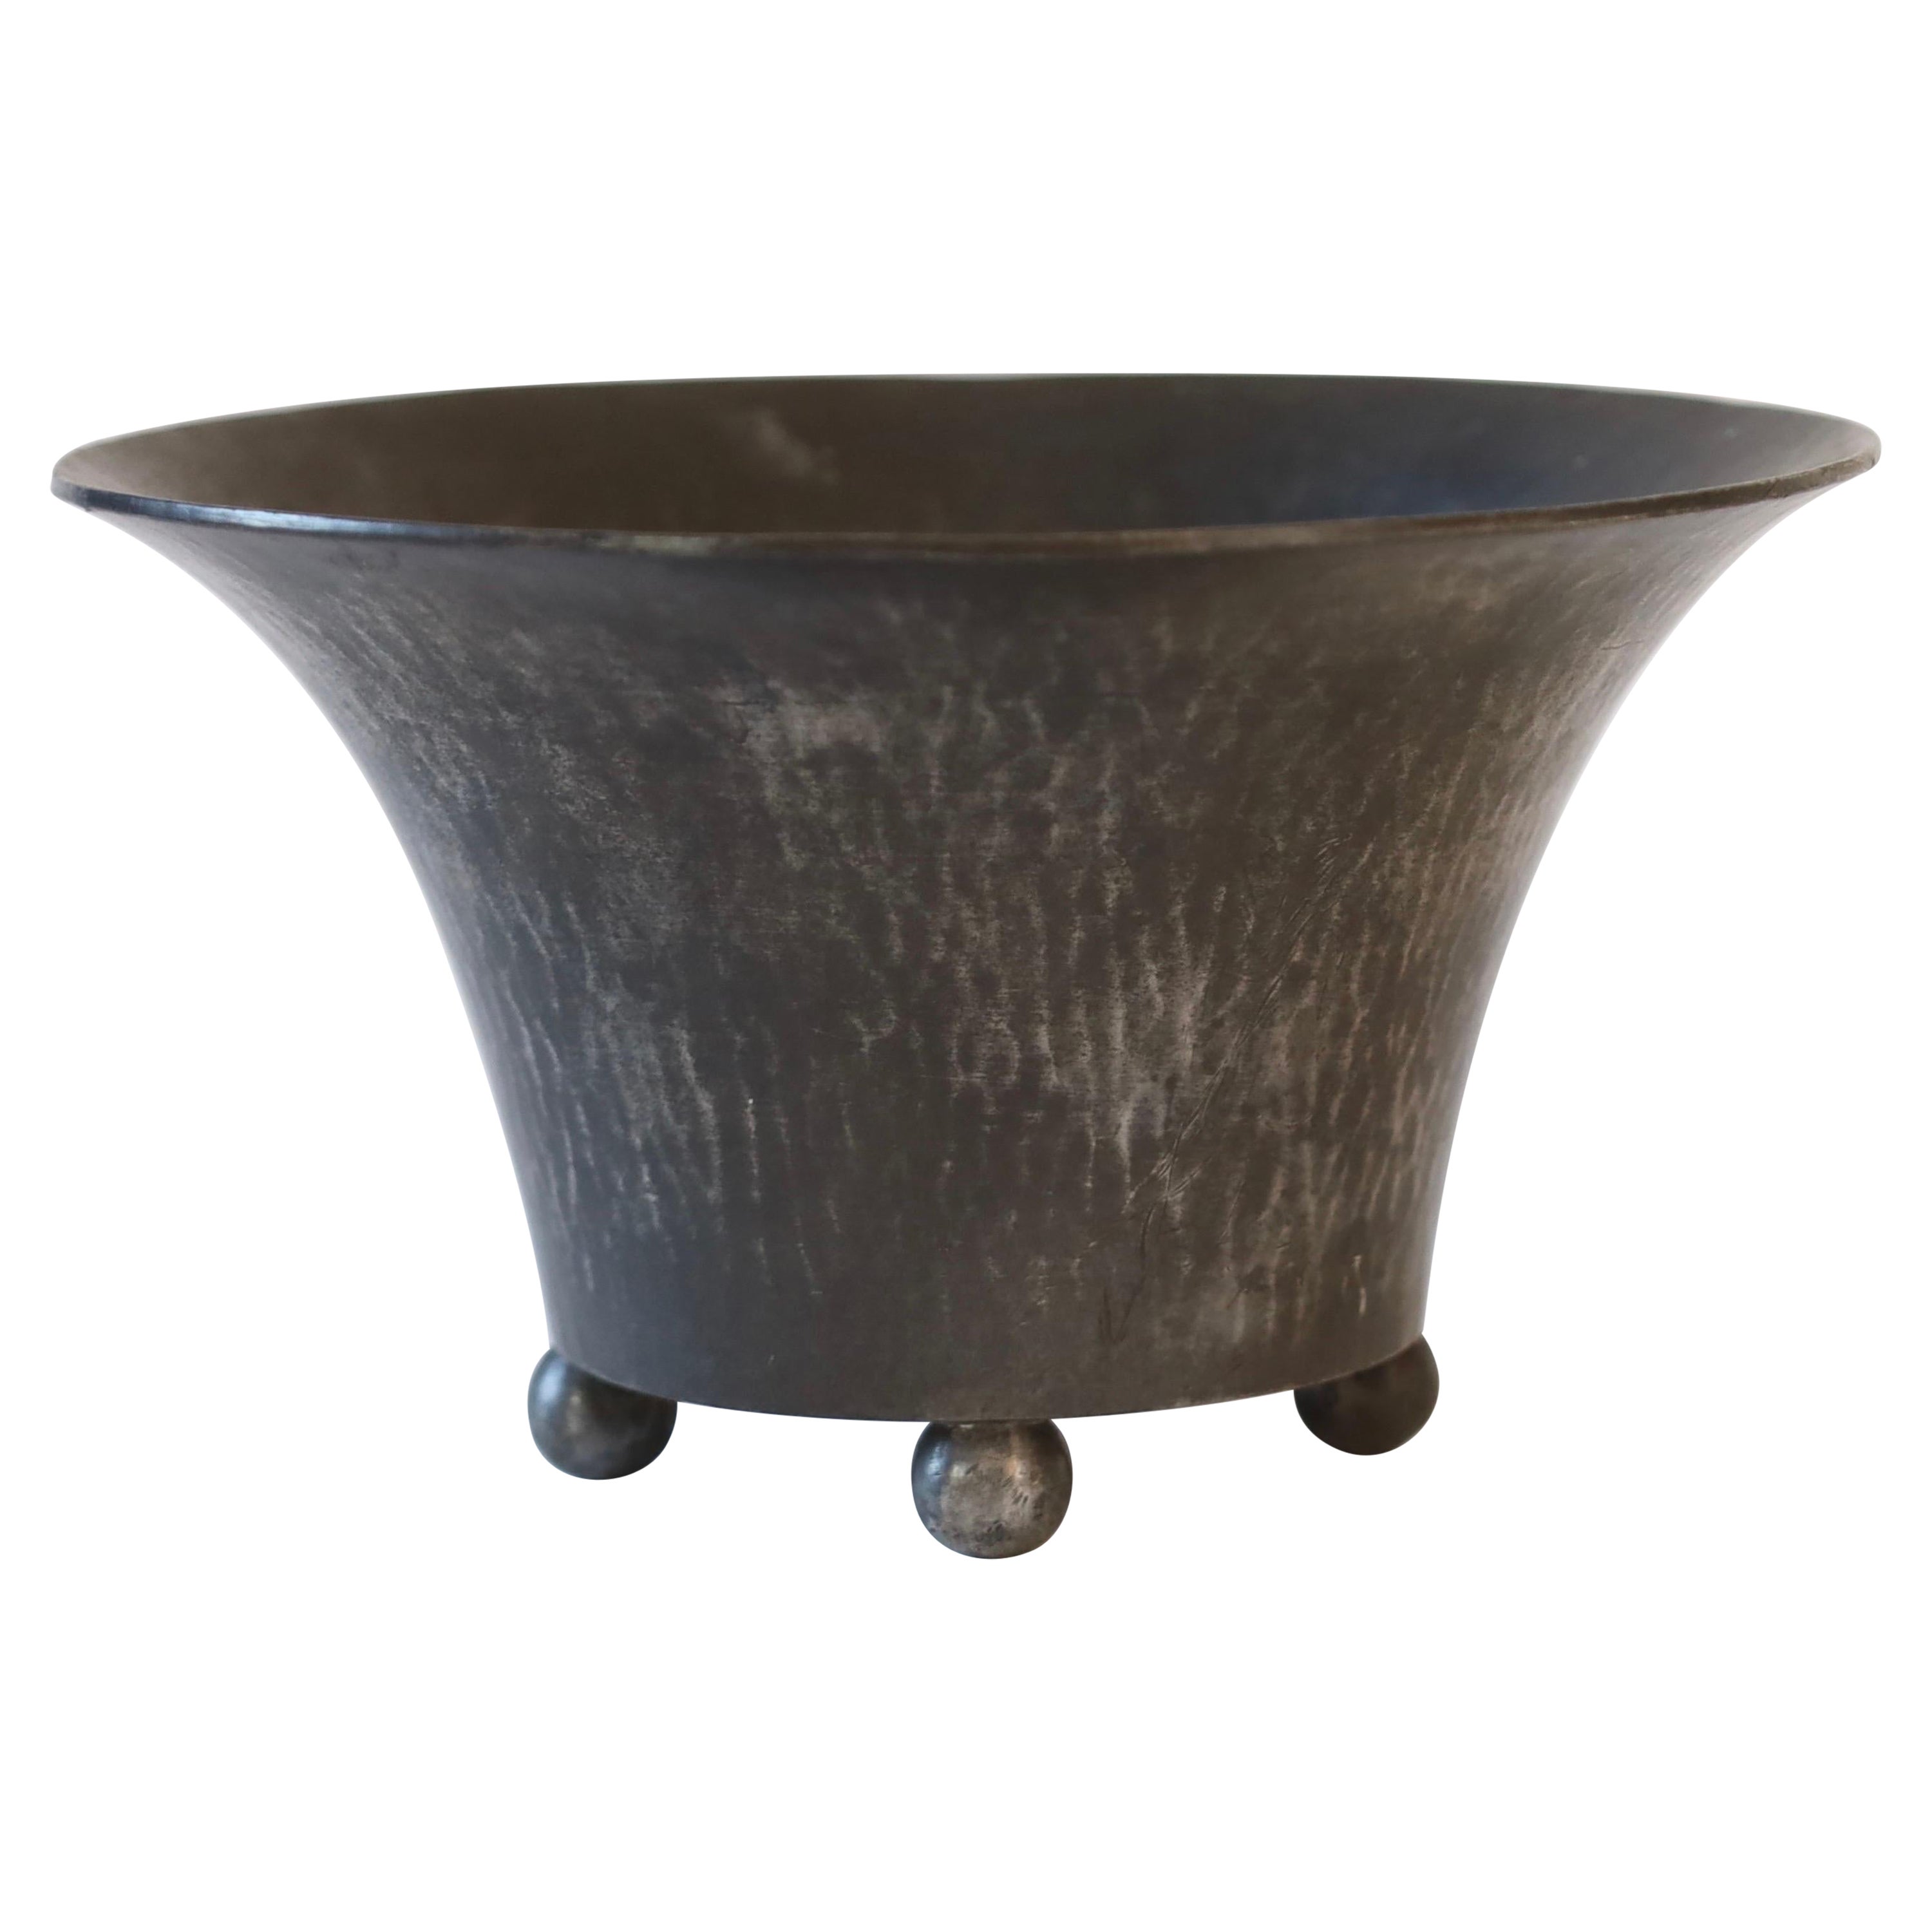 Hammered pewter bowl by Just Andersen, 1920s, Denmark For Sale